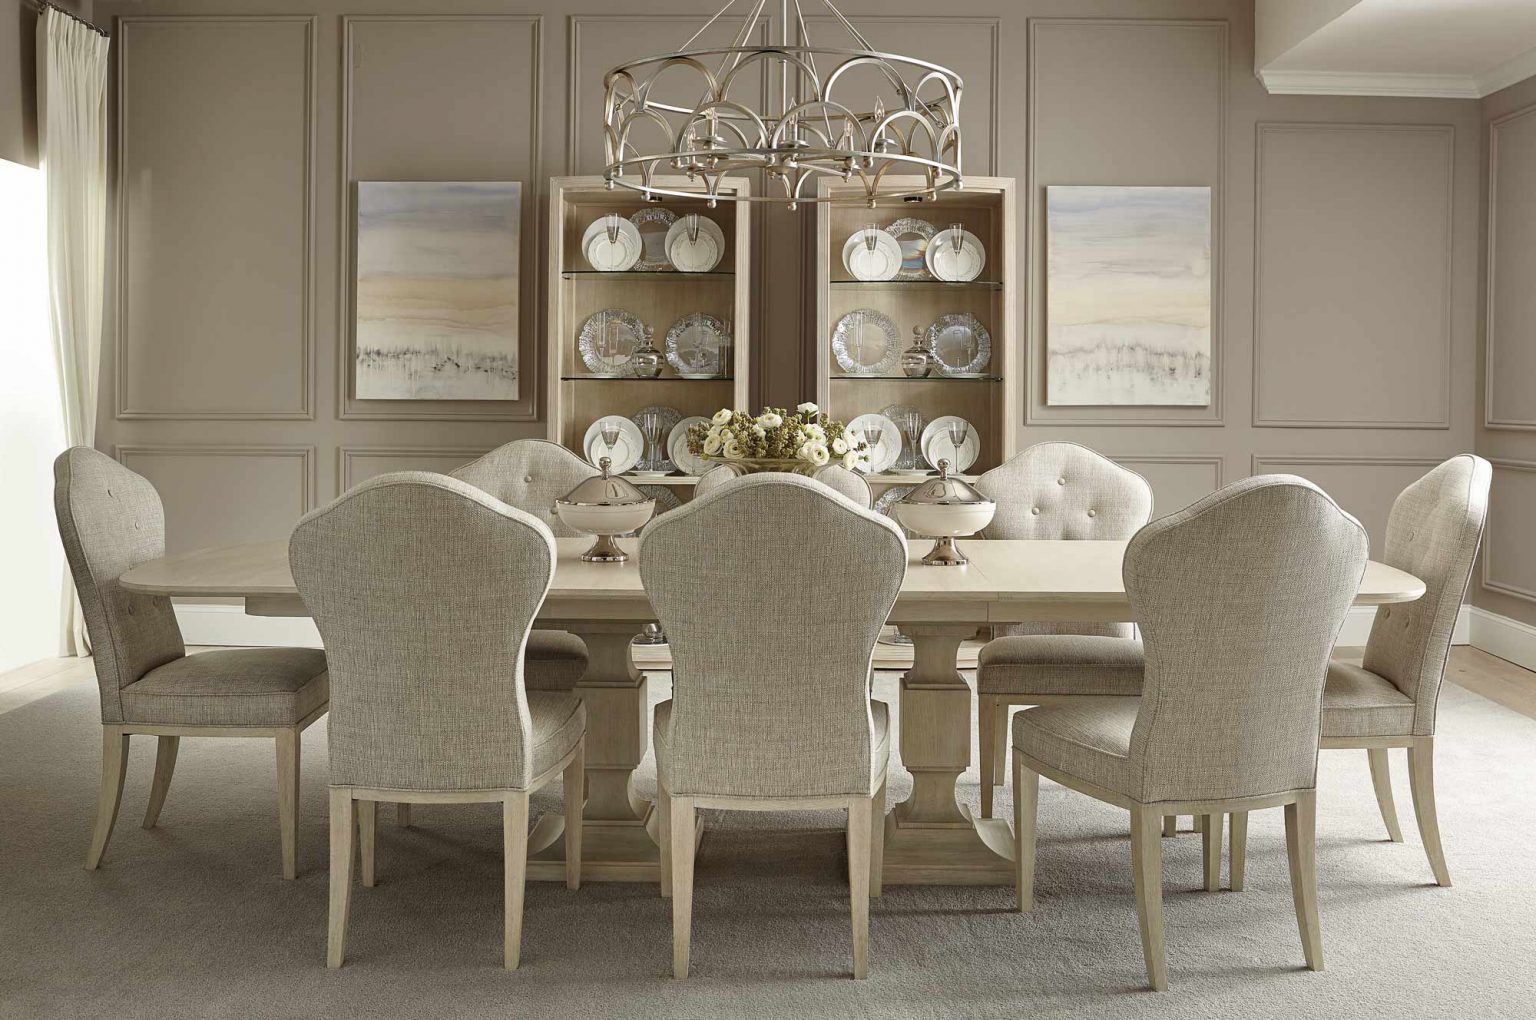 Unique Dining Room Furniture Long Island with Simple Decor